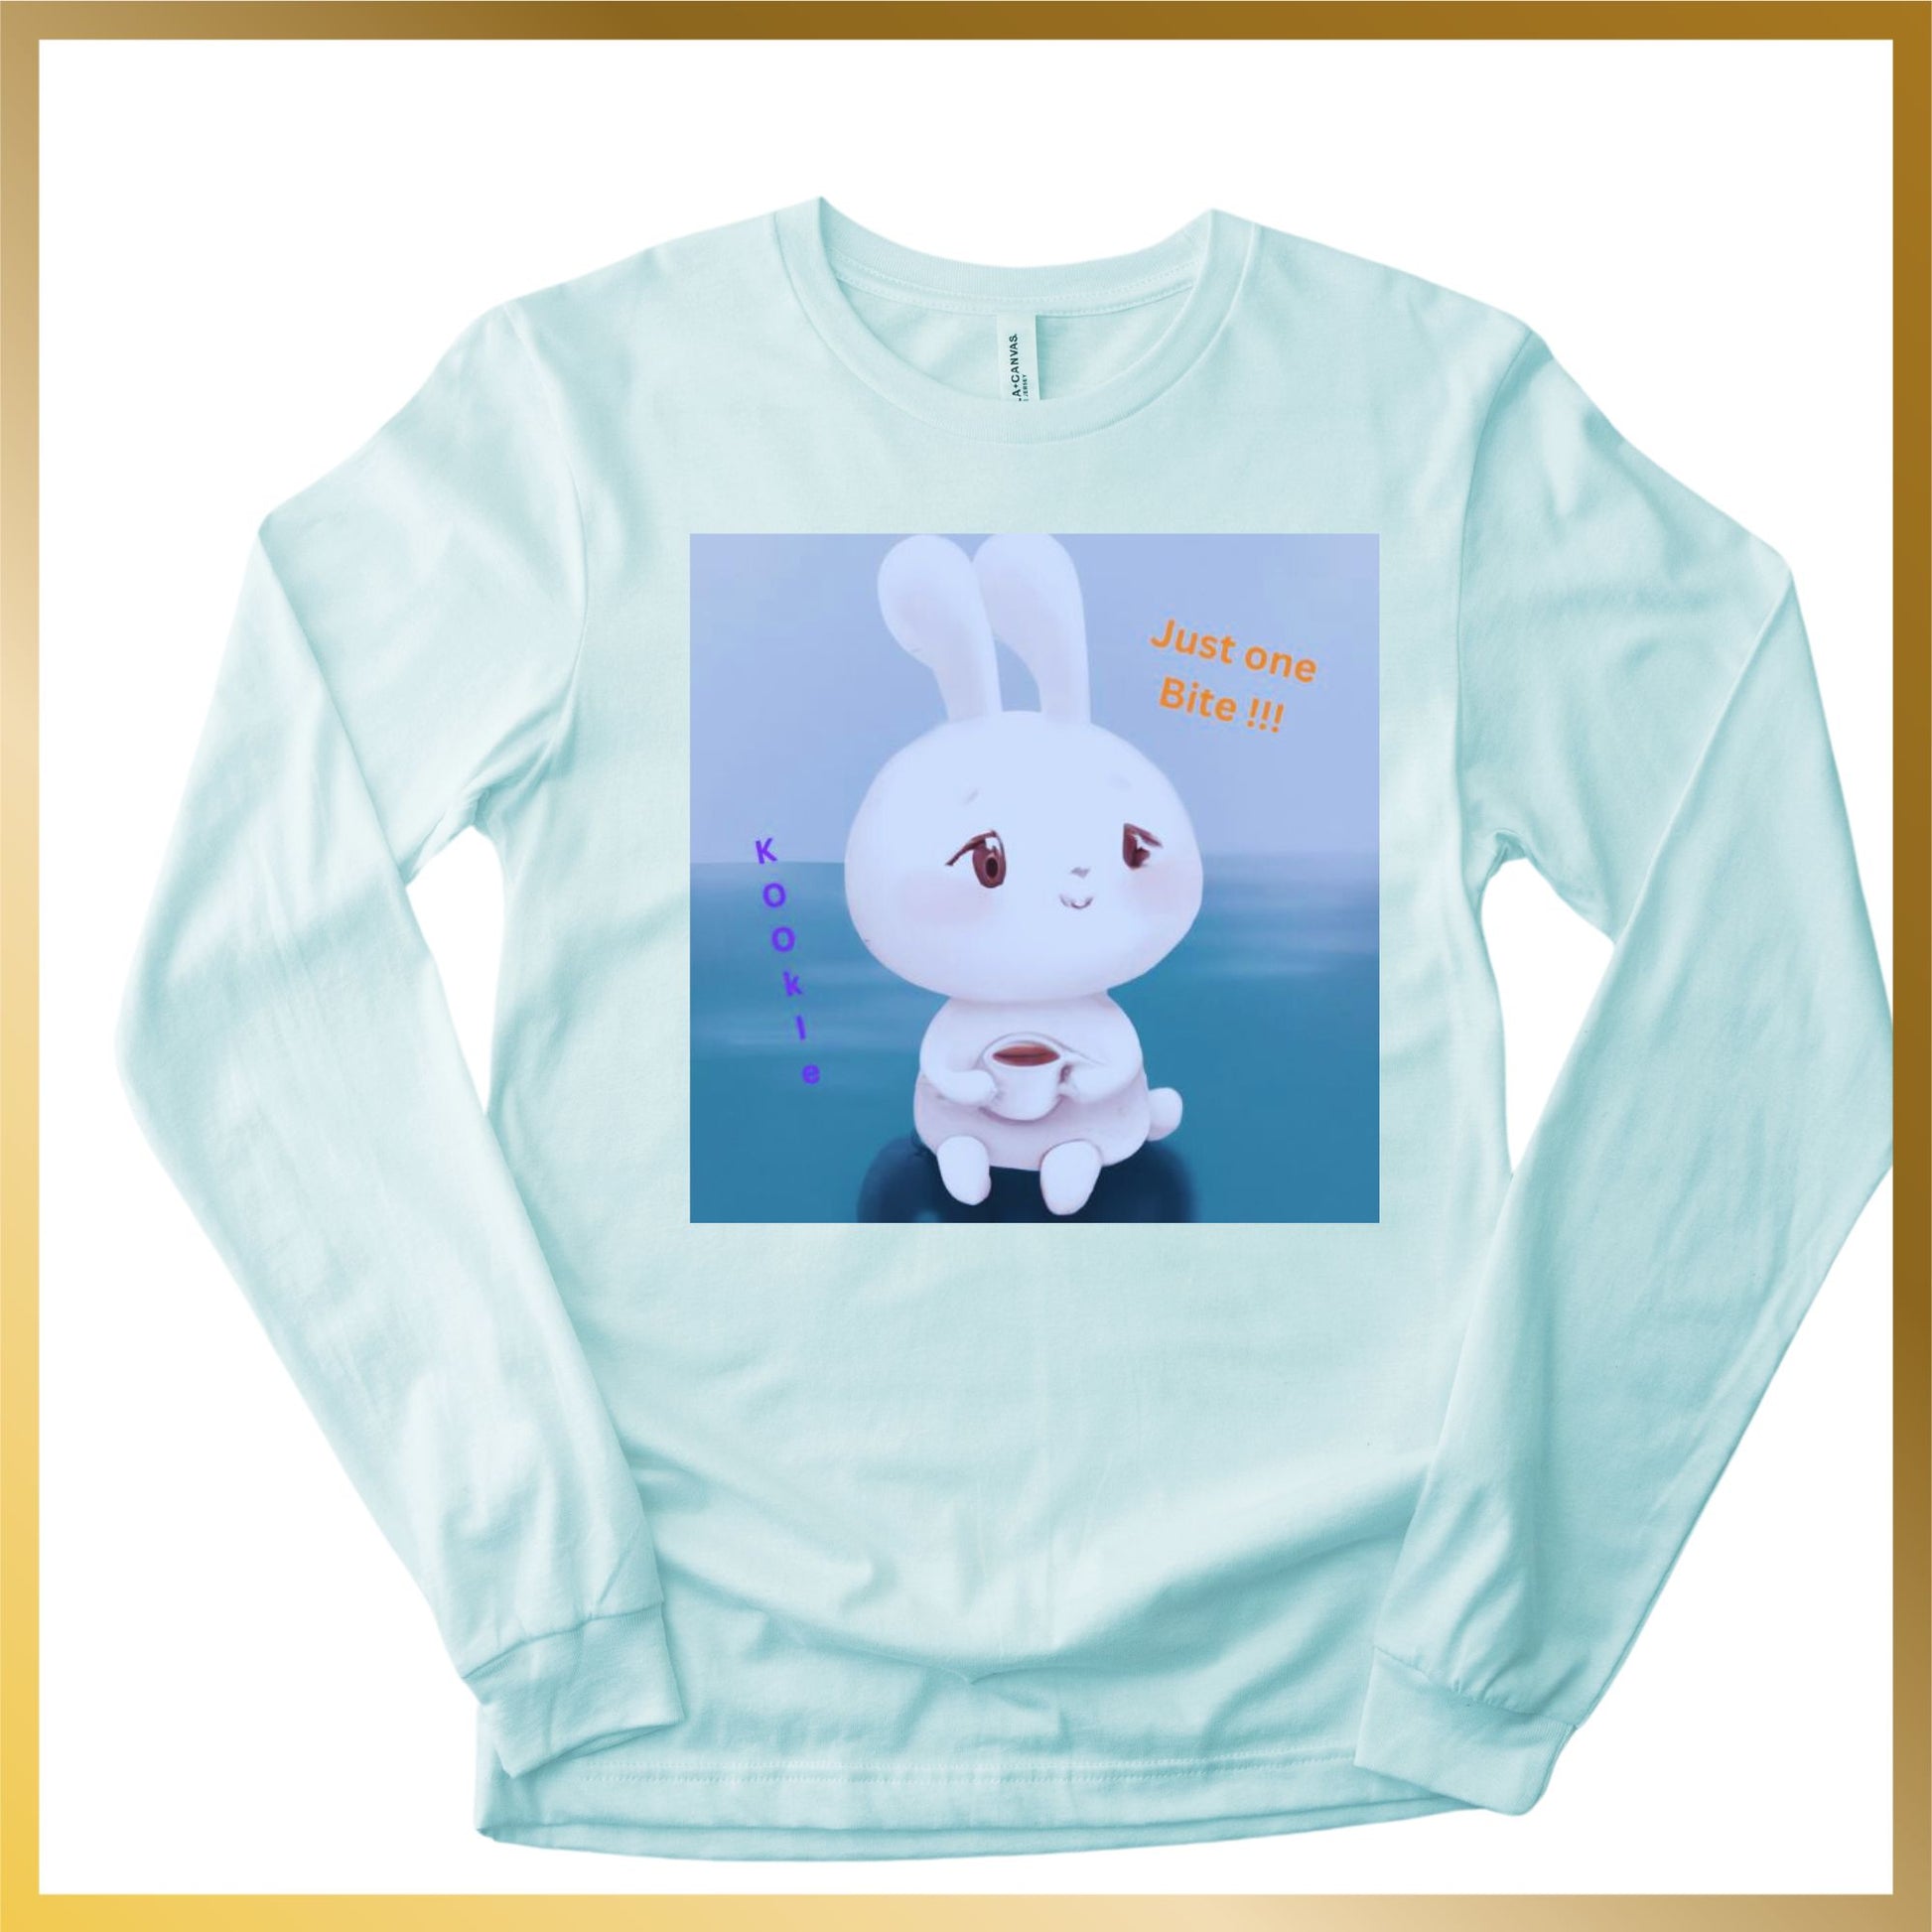 cute snow white bunny said Just one Bite long sleeve blue shirt while holding a mug of coffee